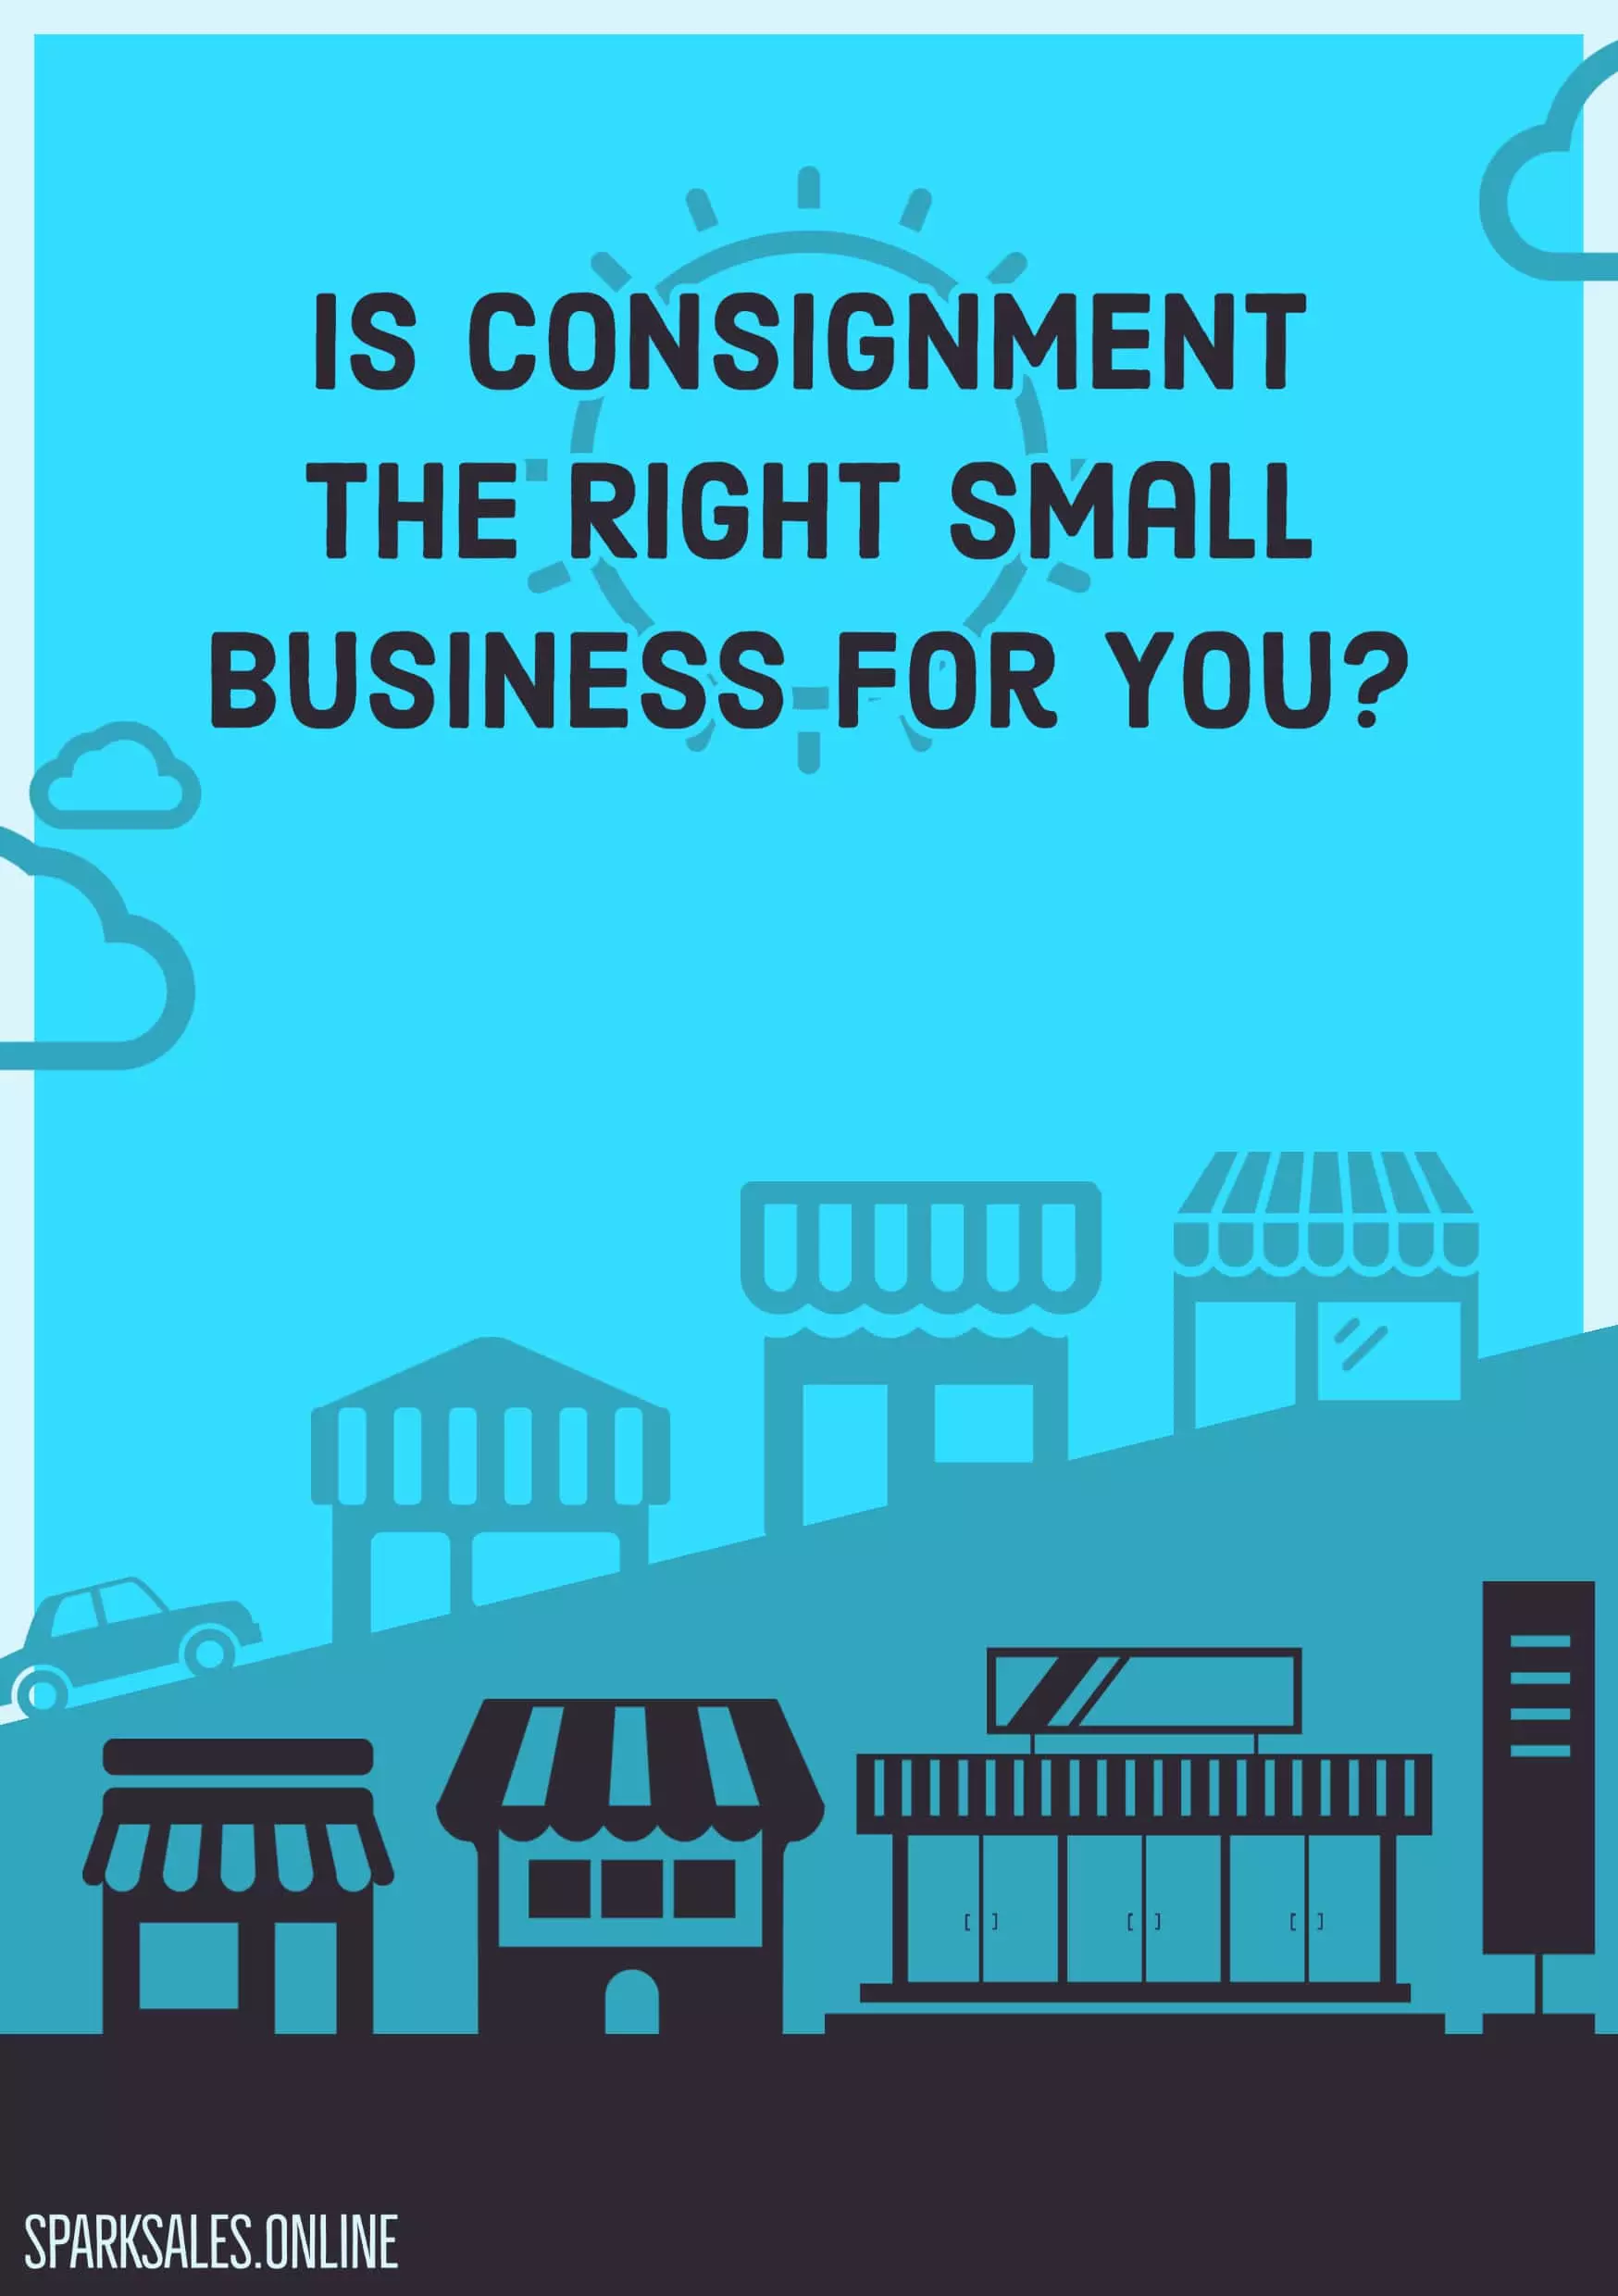 Is Consignment the Right Small Business for You?